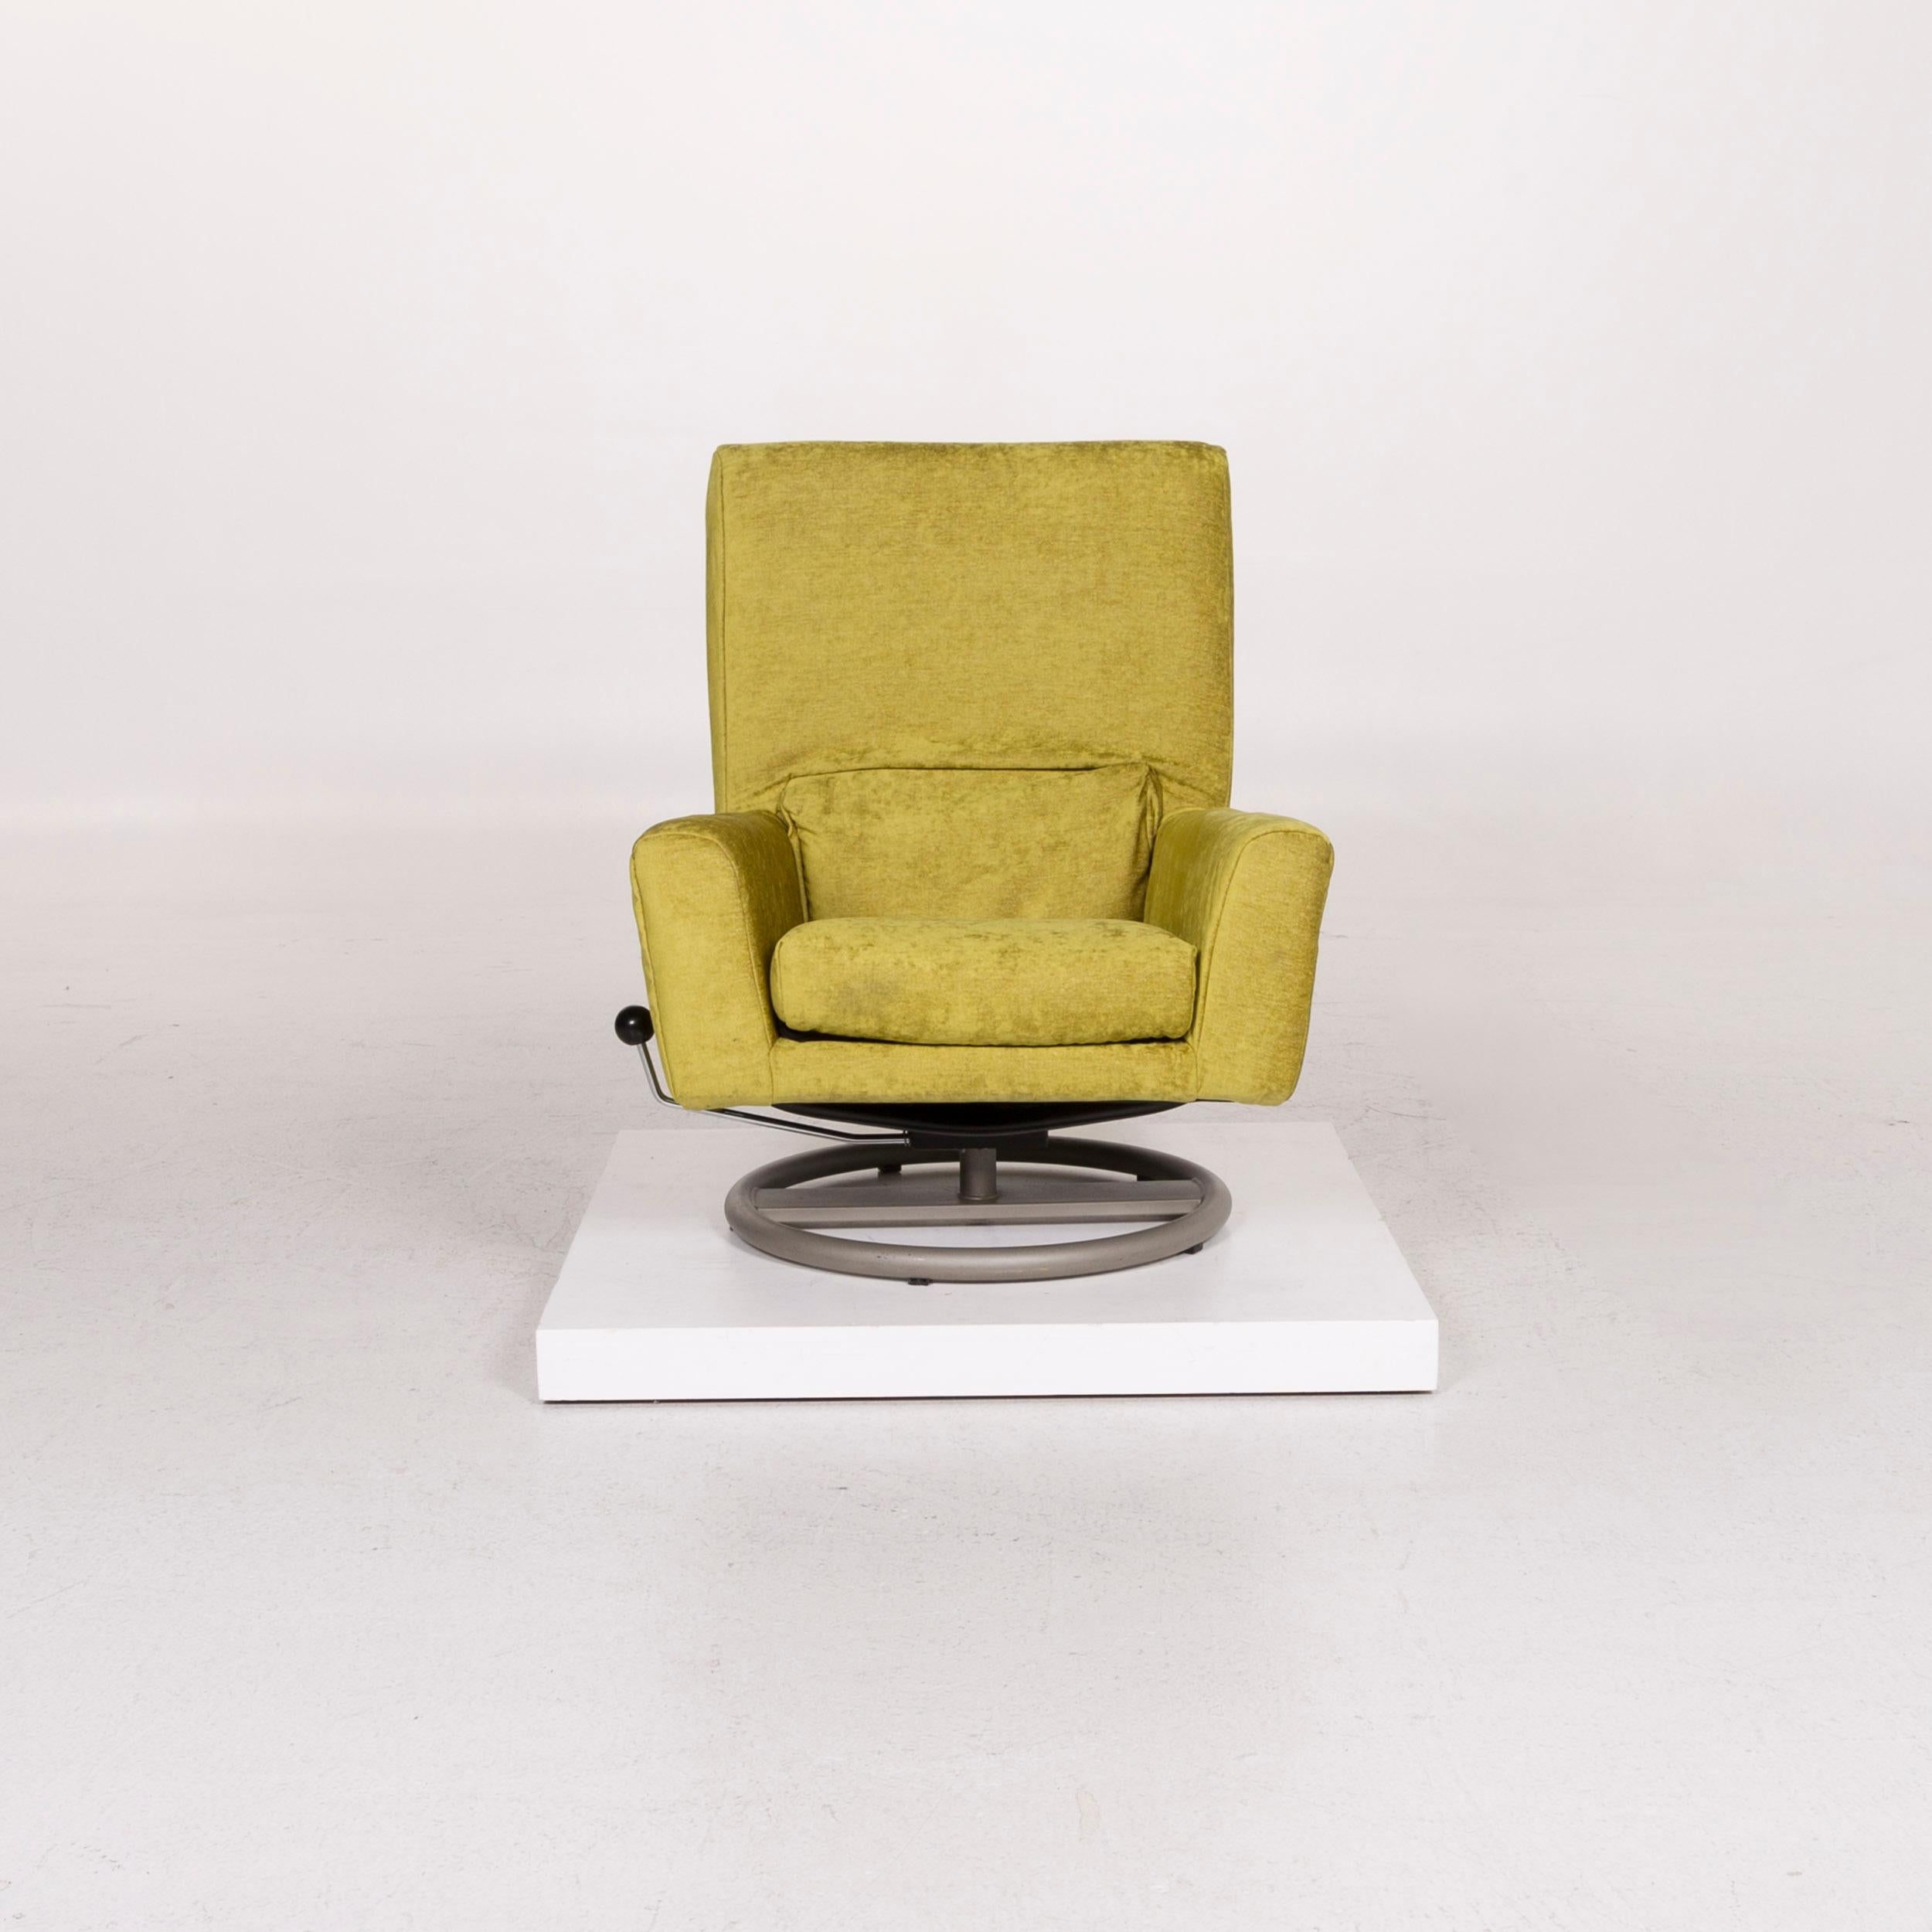 We bring to you a Rolf Benz velvet fabric armchair including Stool green function.
 

 Product measurements in centimeters:
 

Depth 79
Width 82
Height 95
Seat-height 41
Rest-height 53
Seat-depth 54
Seat-width 51
Back-height 57.
 